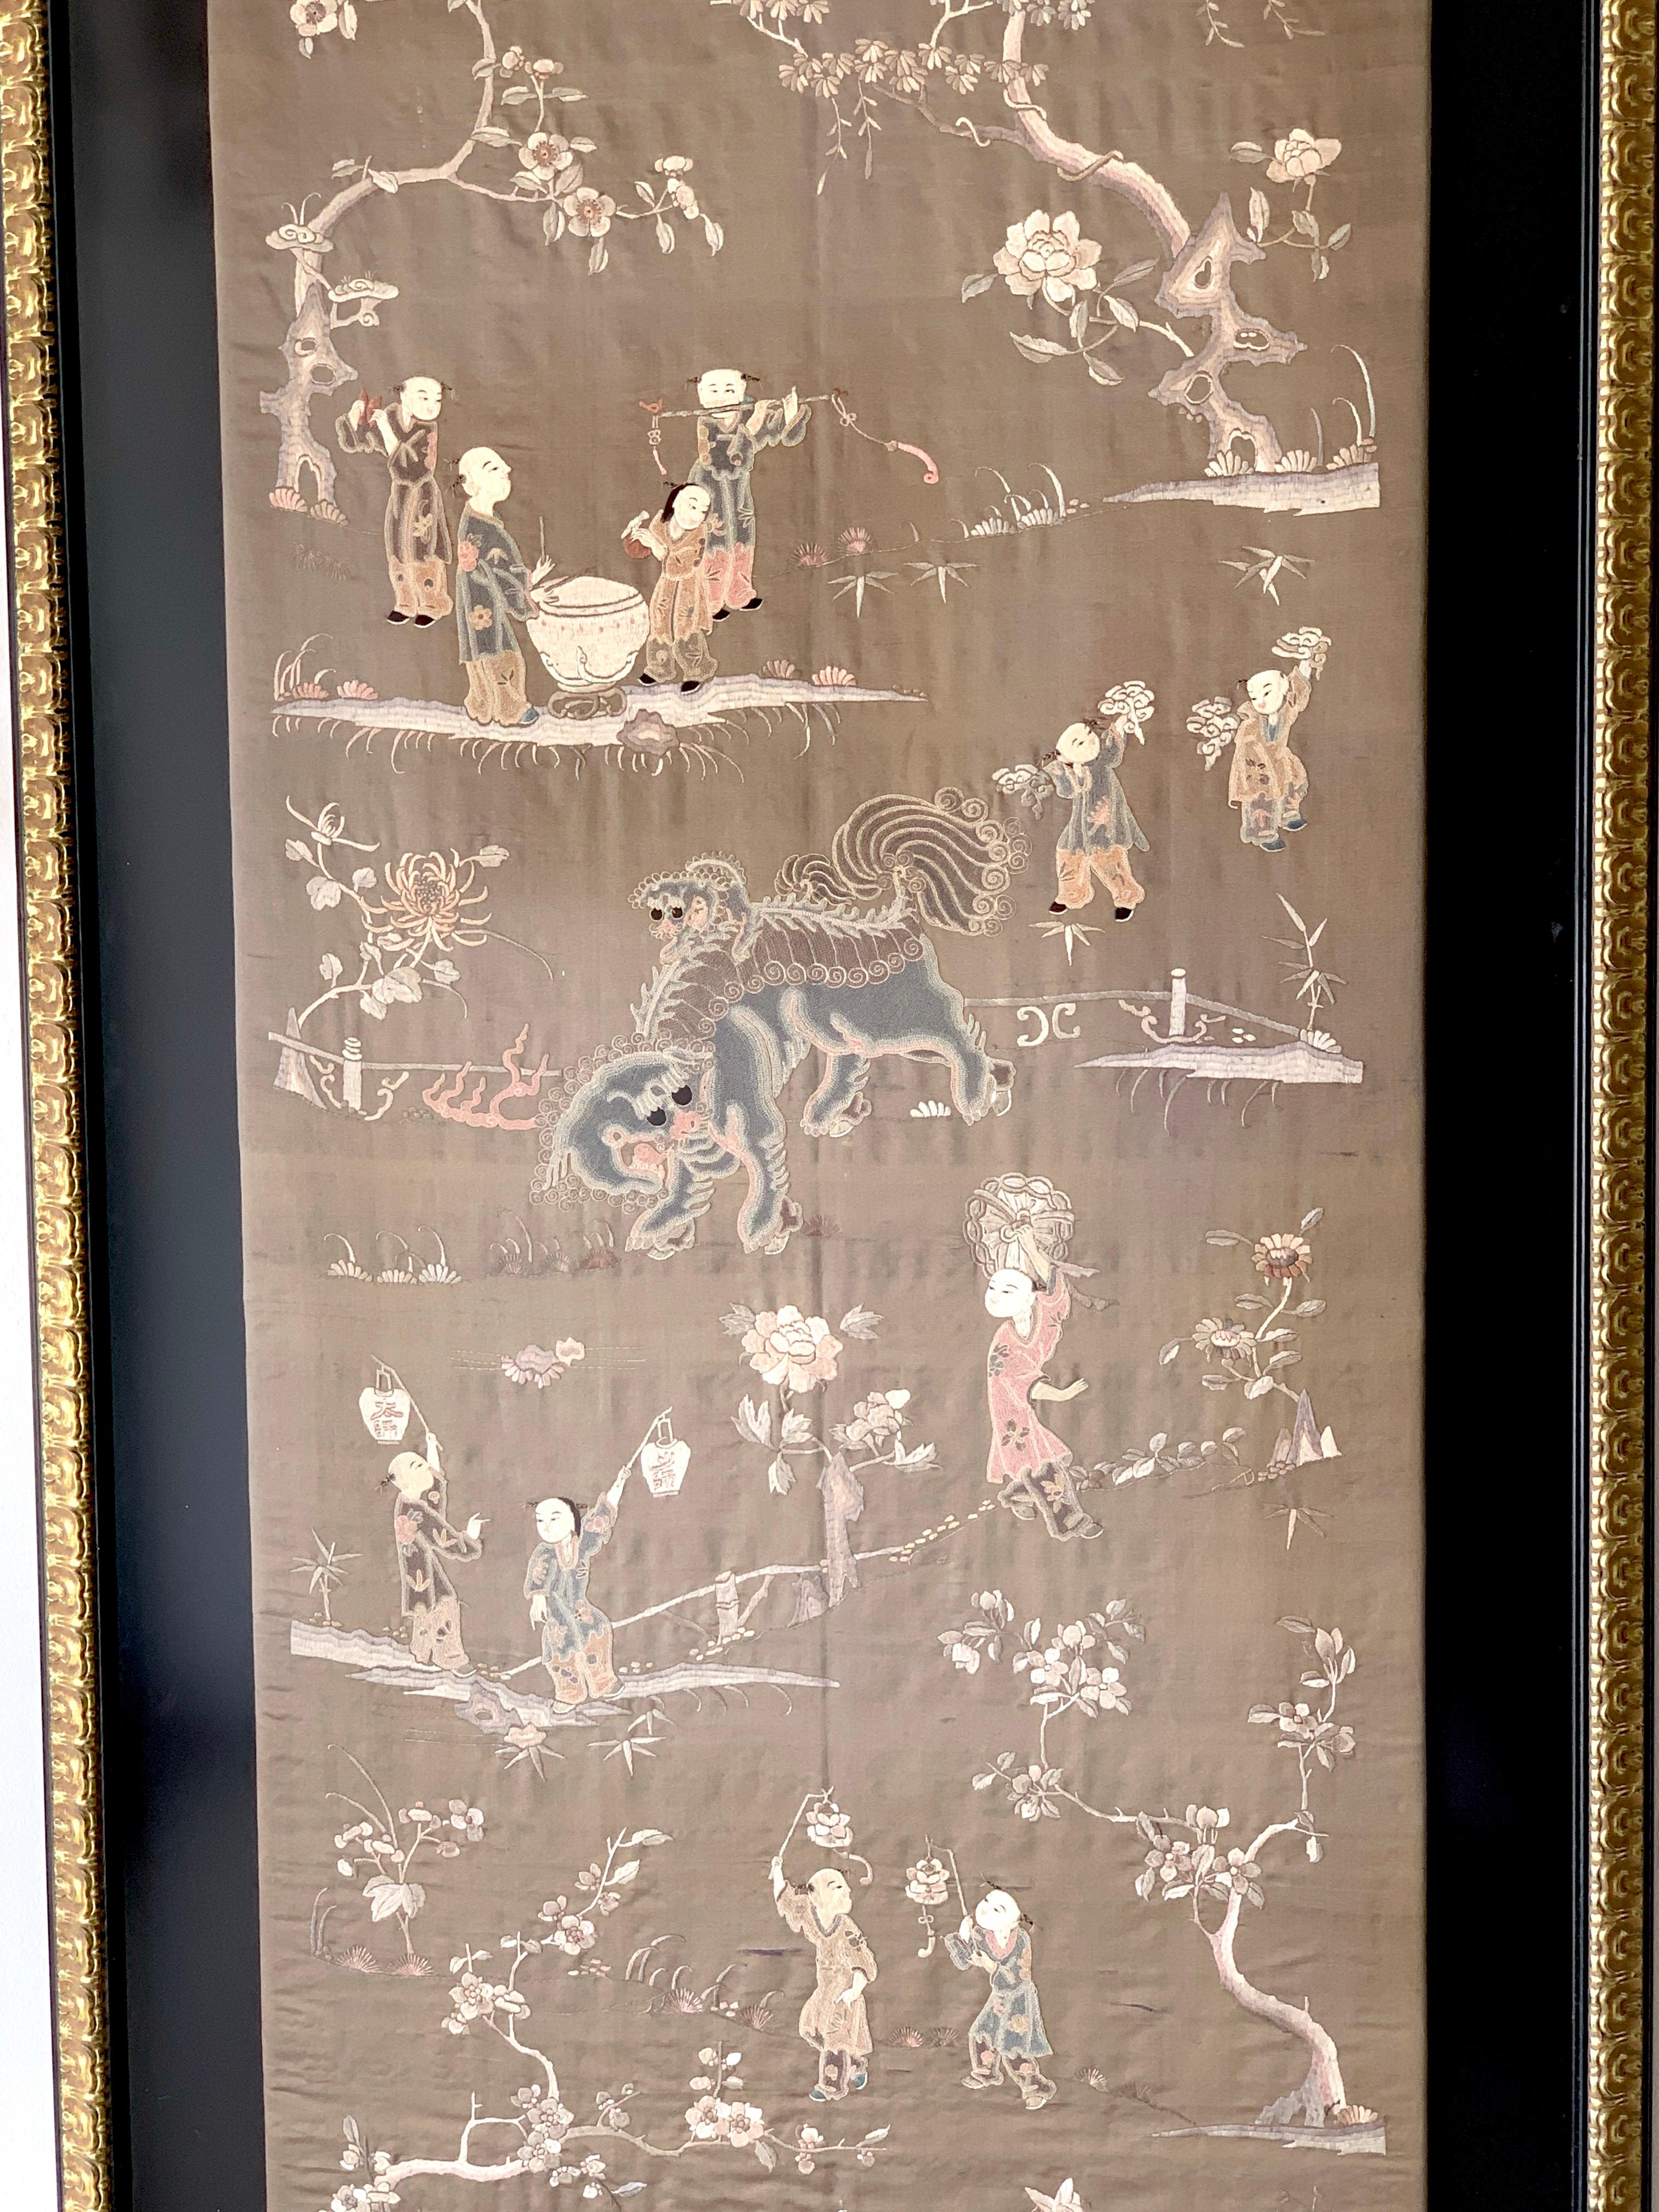 Exquisite Chinese Export Landscape Silk Embroidery In Good Condition For Sale In Atlanta, GA